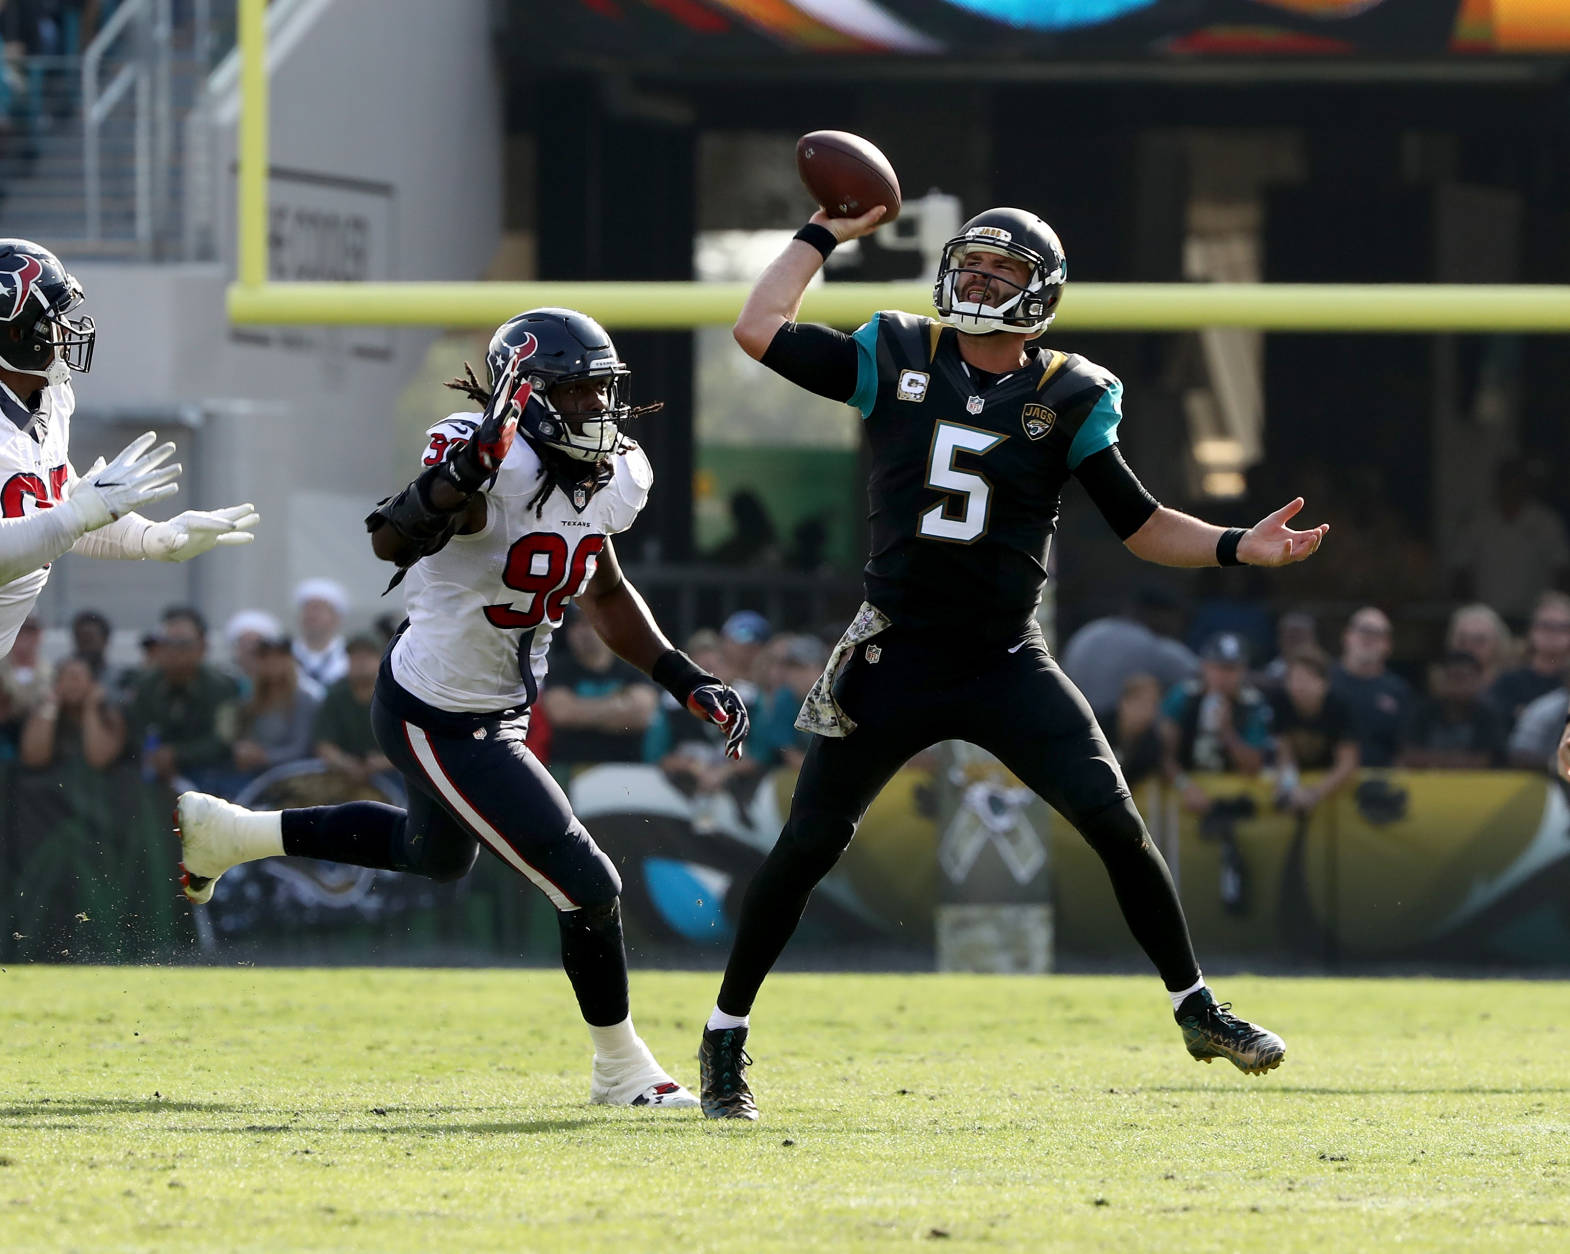 JACKSONVILLE, FL - NOVEMBER 13:   Blake Bortles #5 of the Jacksonville Jaguars attempts a pass as he's pursued by Jadeveon Clowney #90 of the Houston Texans during the game at EverBank Field on November 13, 2016 in Jacksonville, Florida.  (Photo by Sam Greenwood/Getty Images)